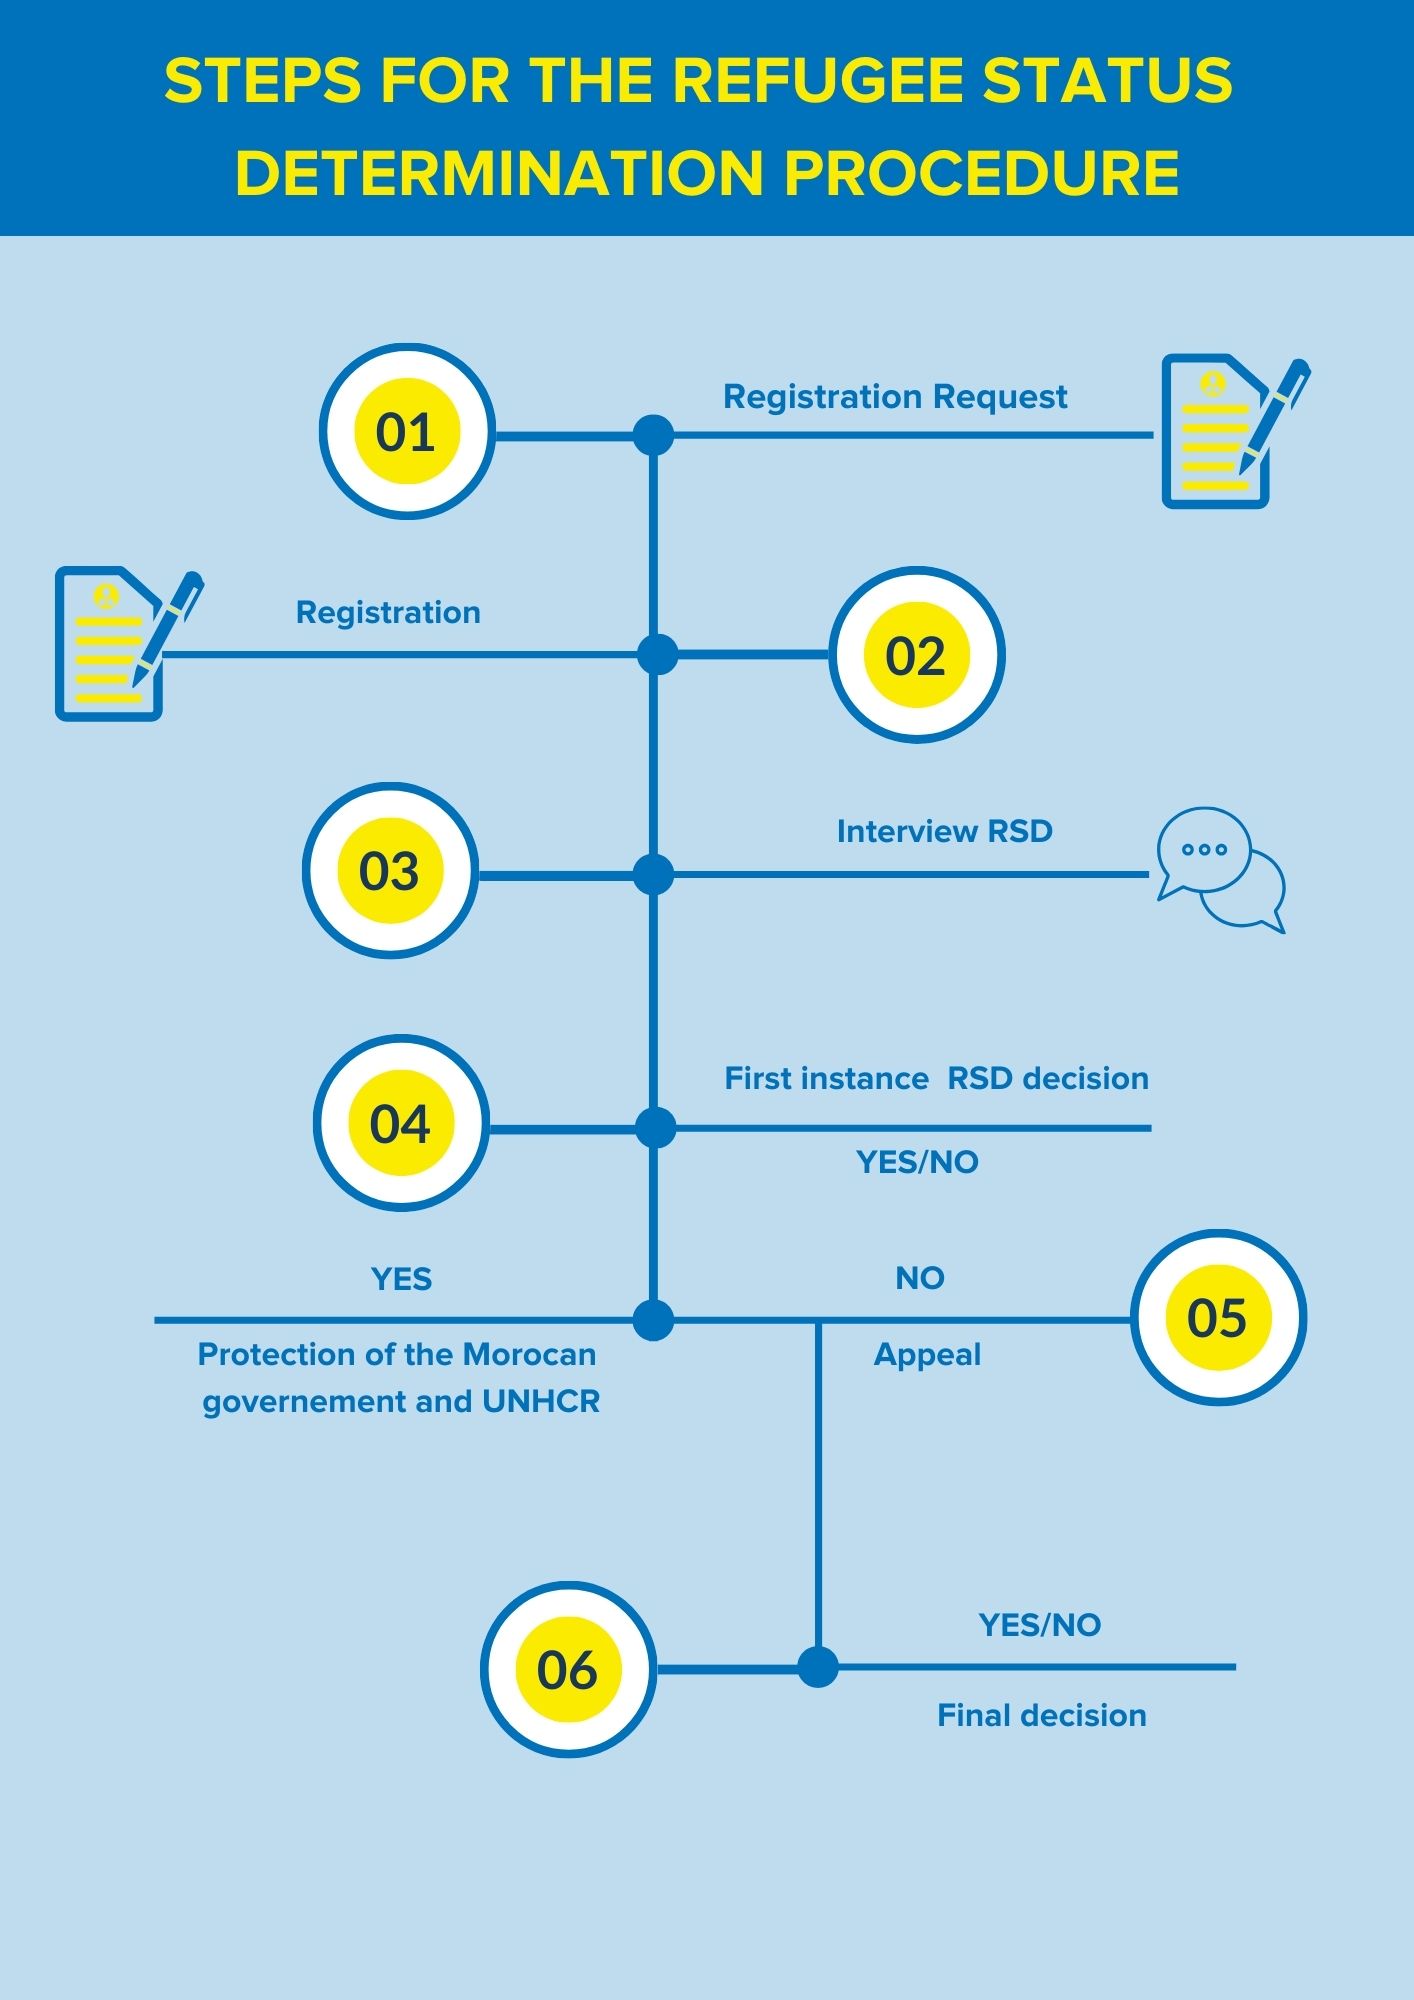 STEPS FOR THE REFUGEE STATUS 
DETERMINATION PROCEDURE :
1-Registration Request
2-Registration
3-Interview RSD
4-First instance  RSD decision 
5-a Yes :Protection of the Morocan 
governement and UNHCR
   b No :Appeal
6- YES/NO : Final decision